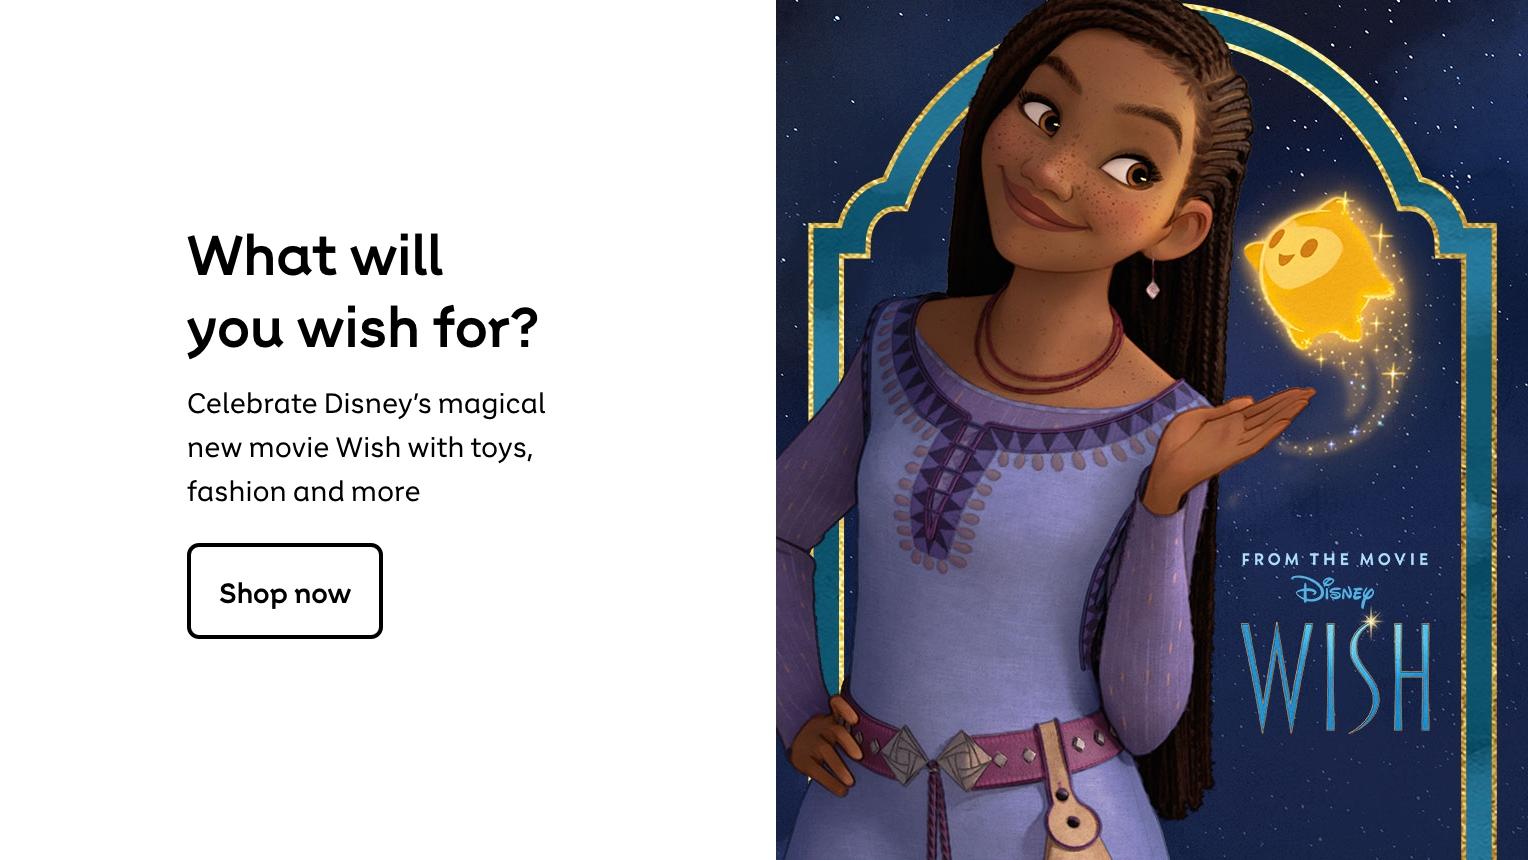 What will you
wish for?
Celebrate Disney's magical new movie
Wish with toys, fashion and more
Shop now